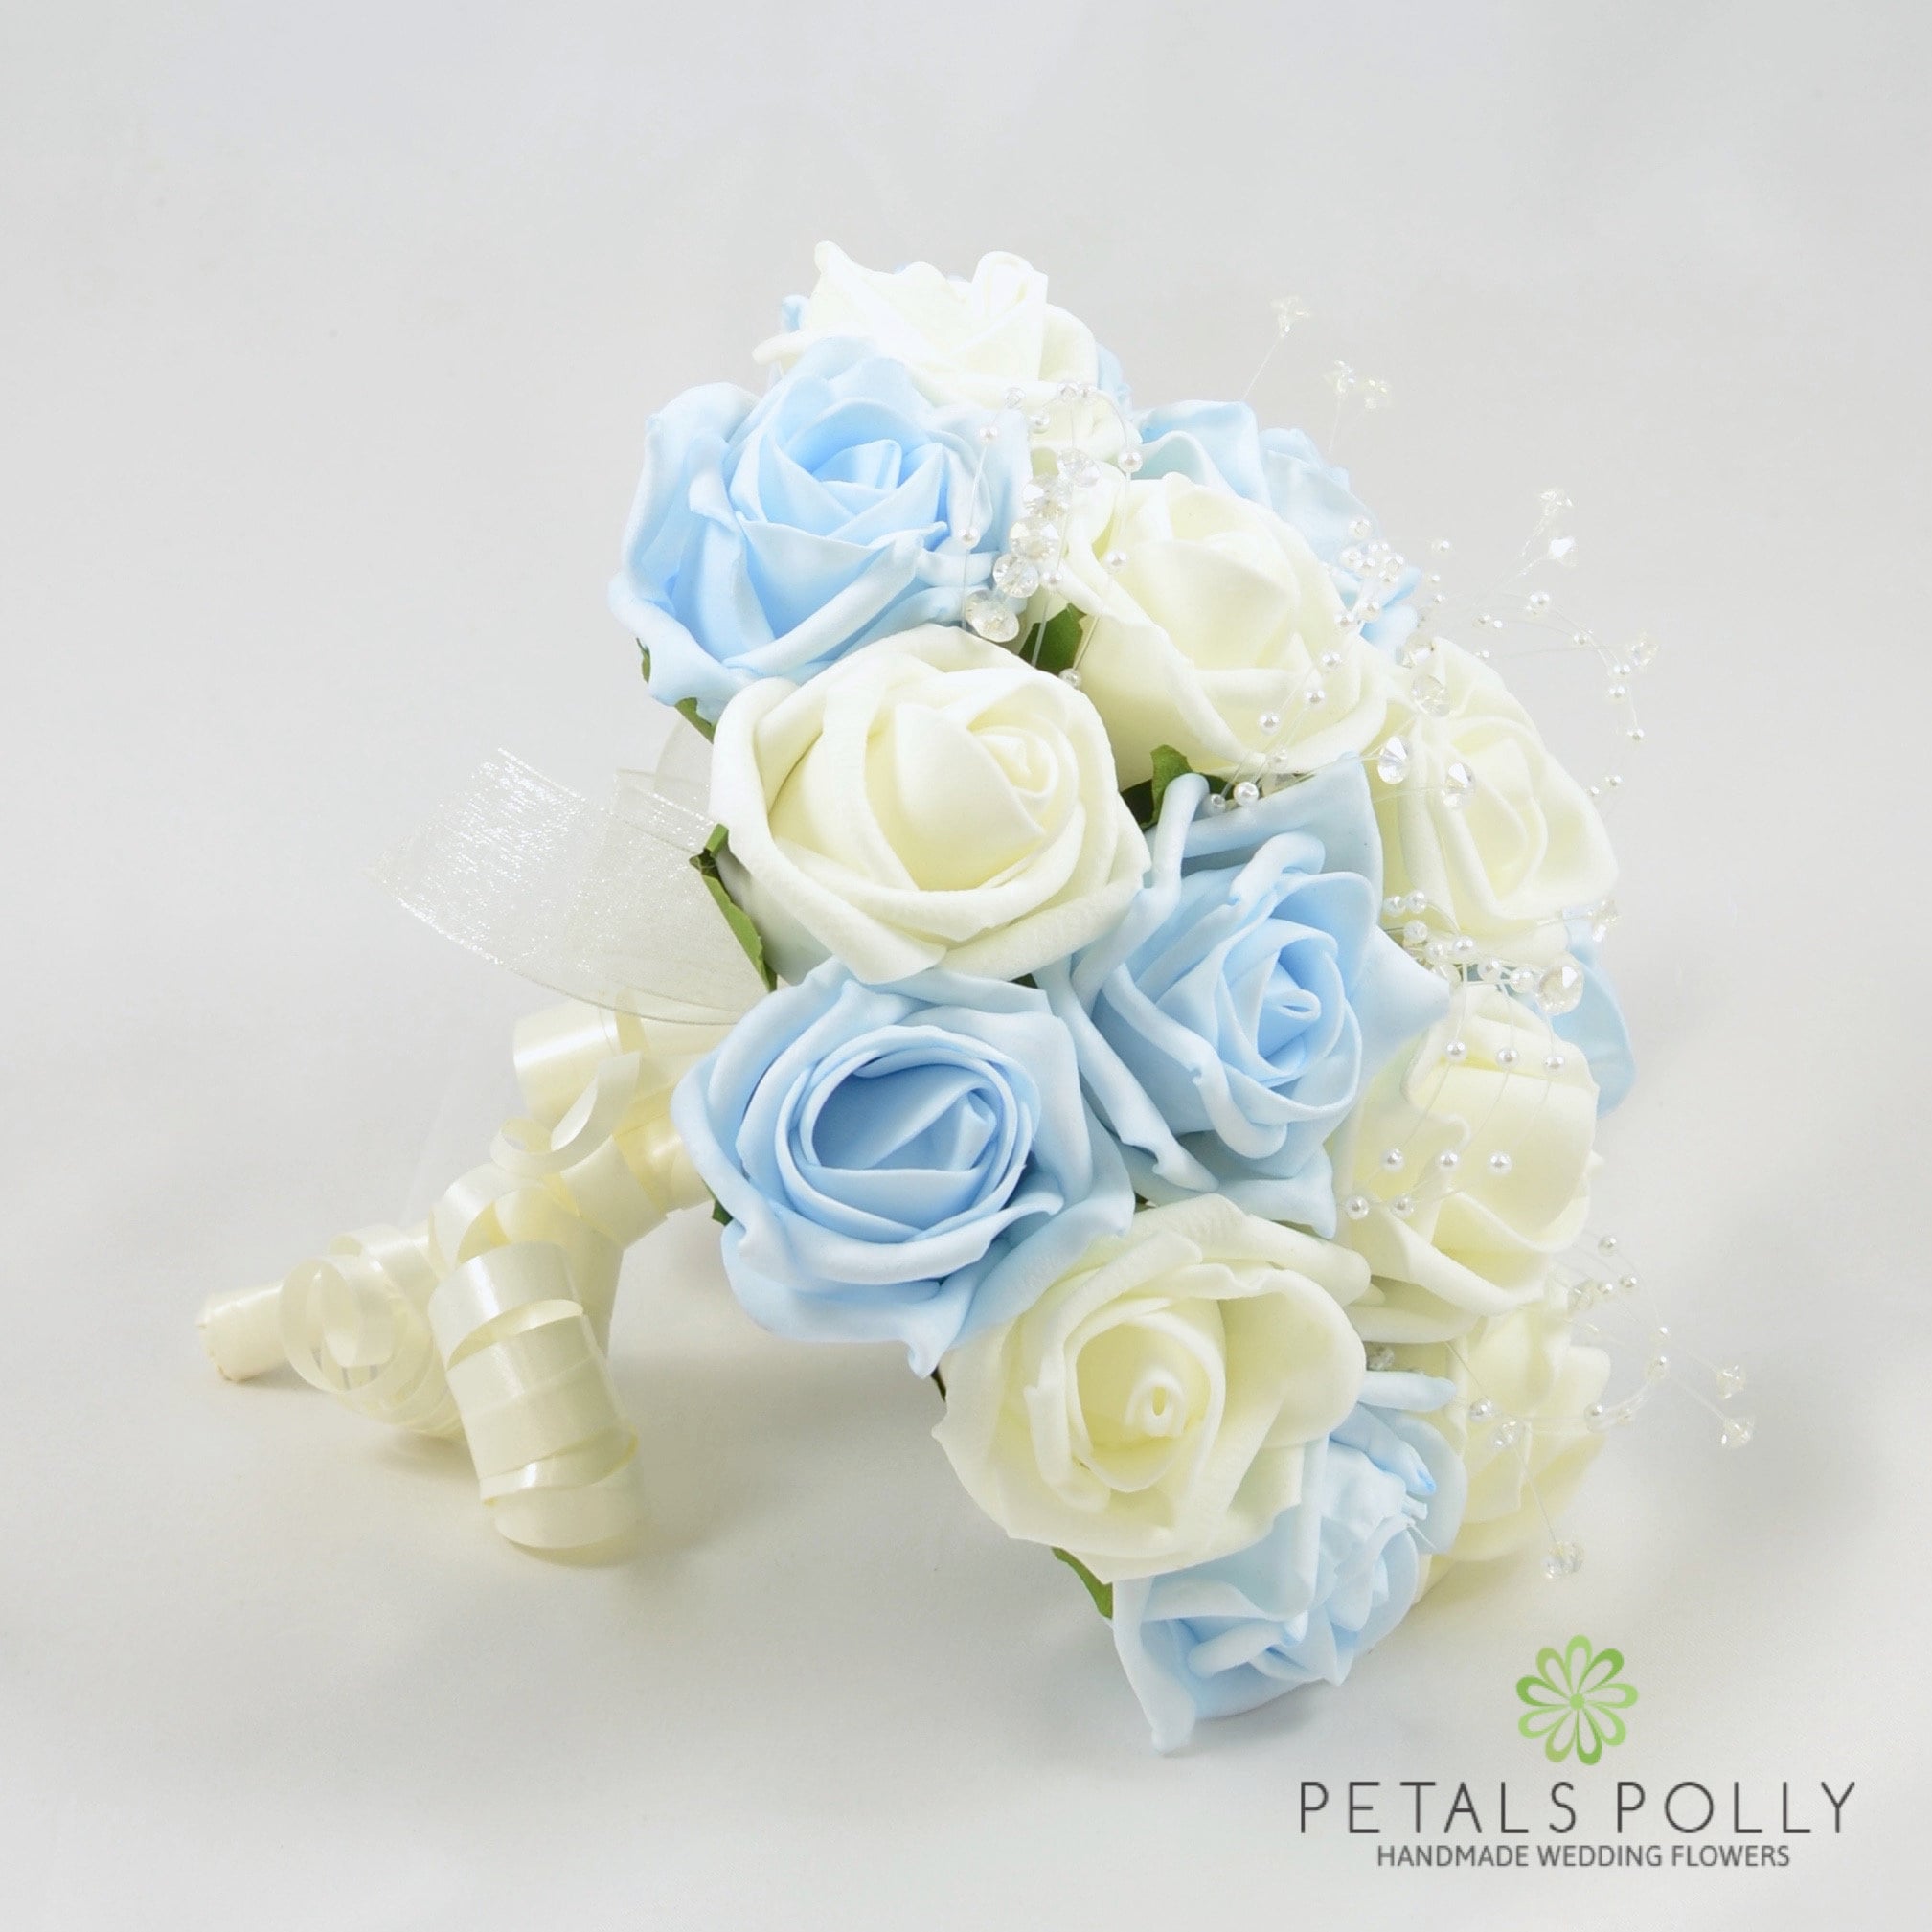 IVORY & NAVY BLUE ROSES BRIDES OR BRIDESMAIDS POSY ARTIFICIAL WEDDING FLOWERS 